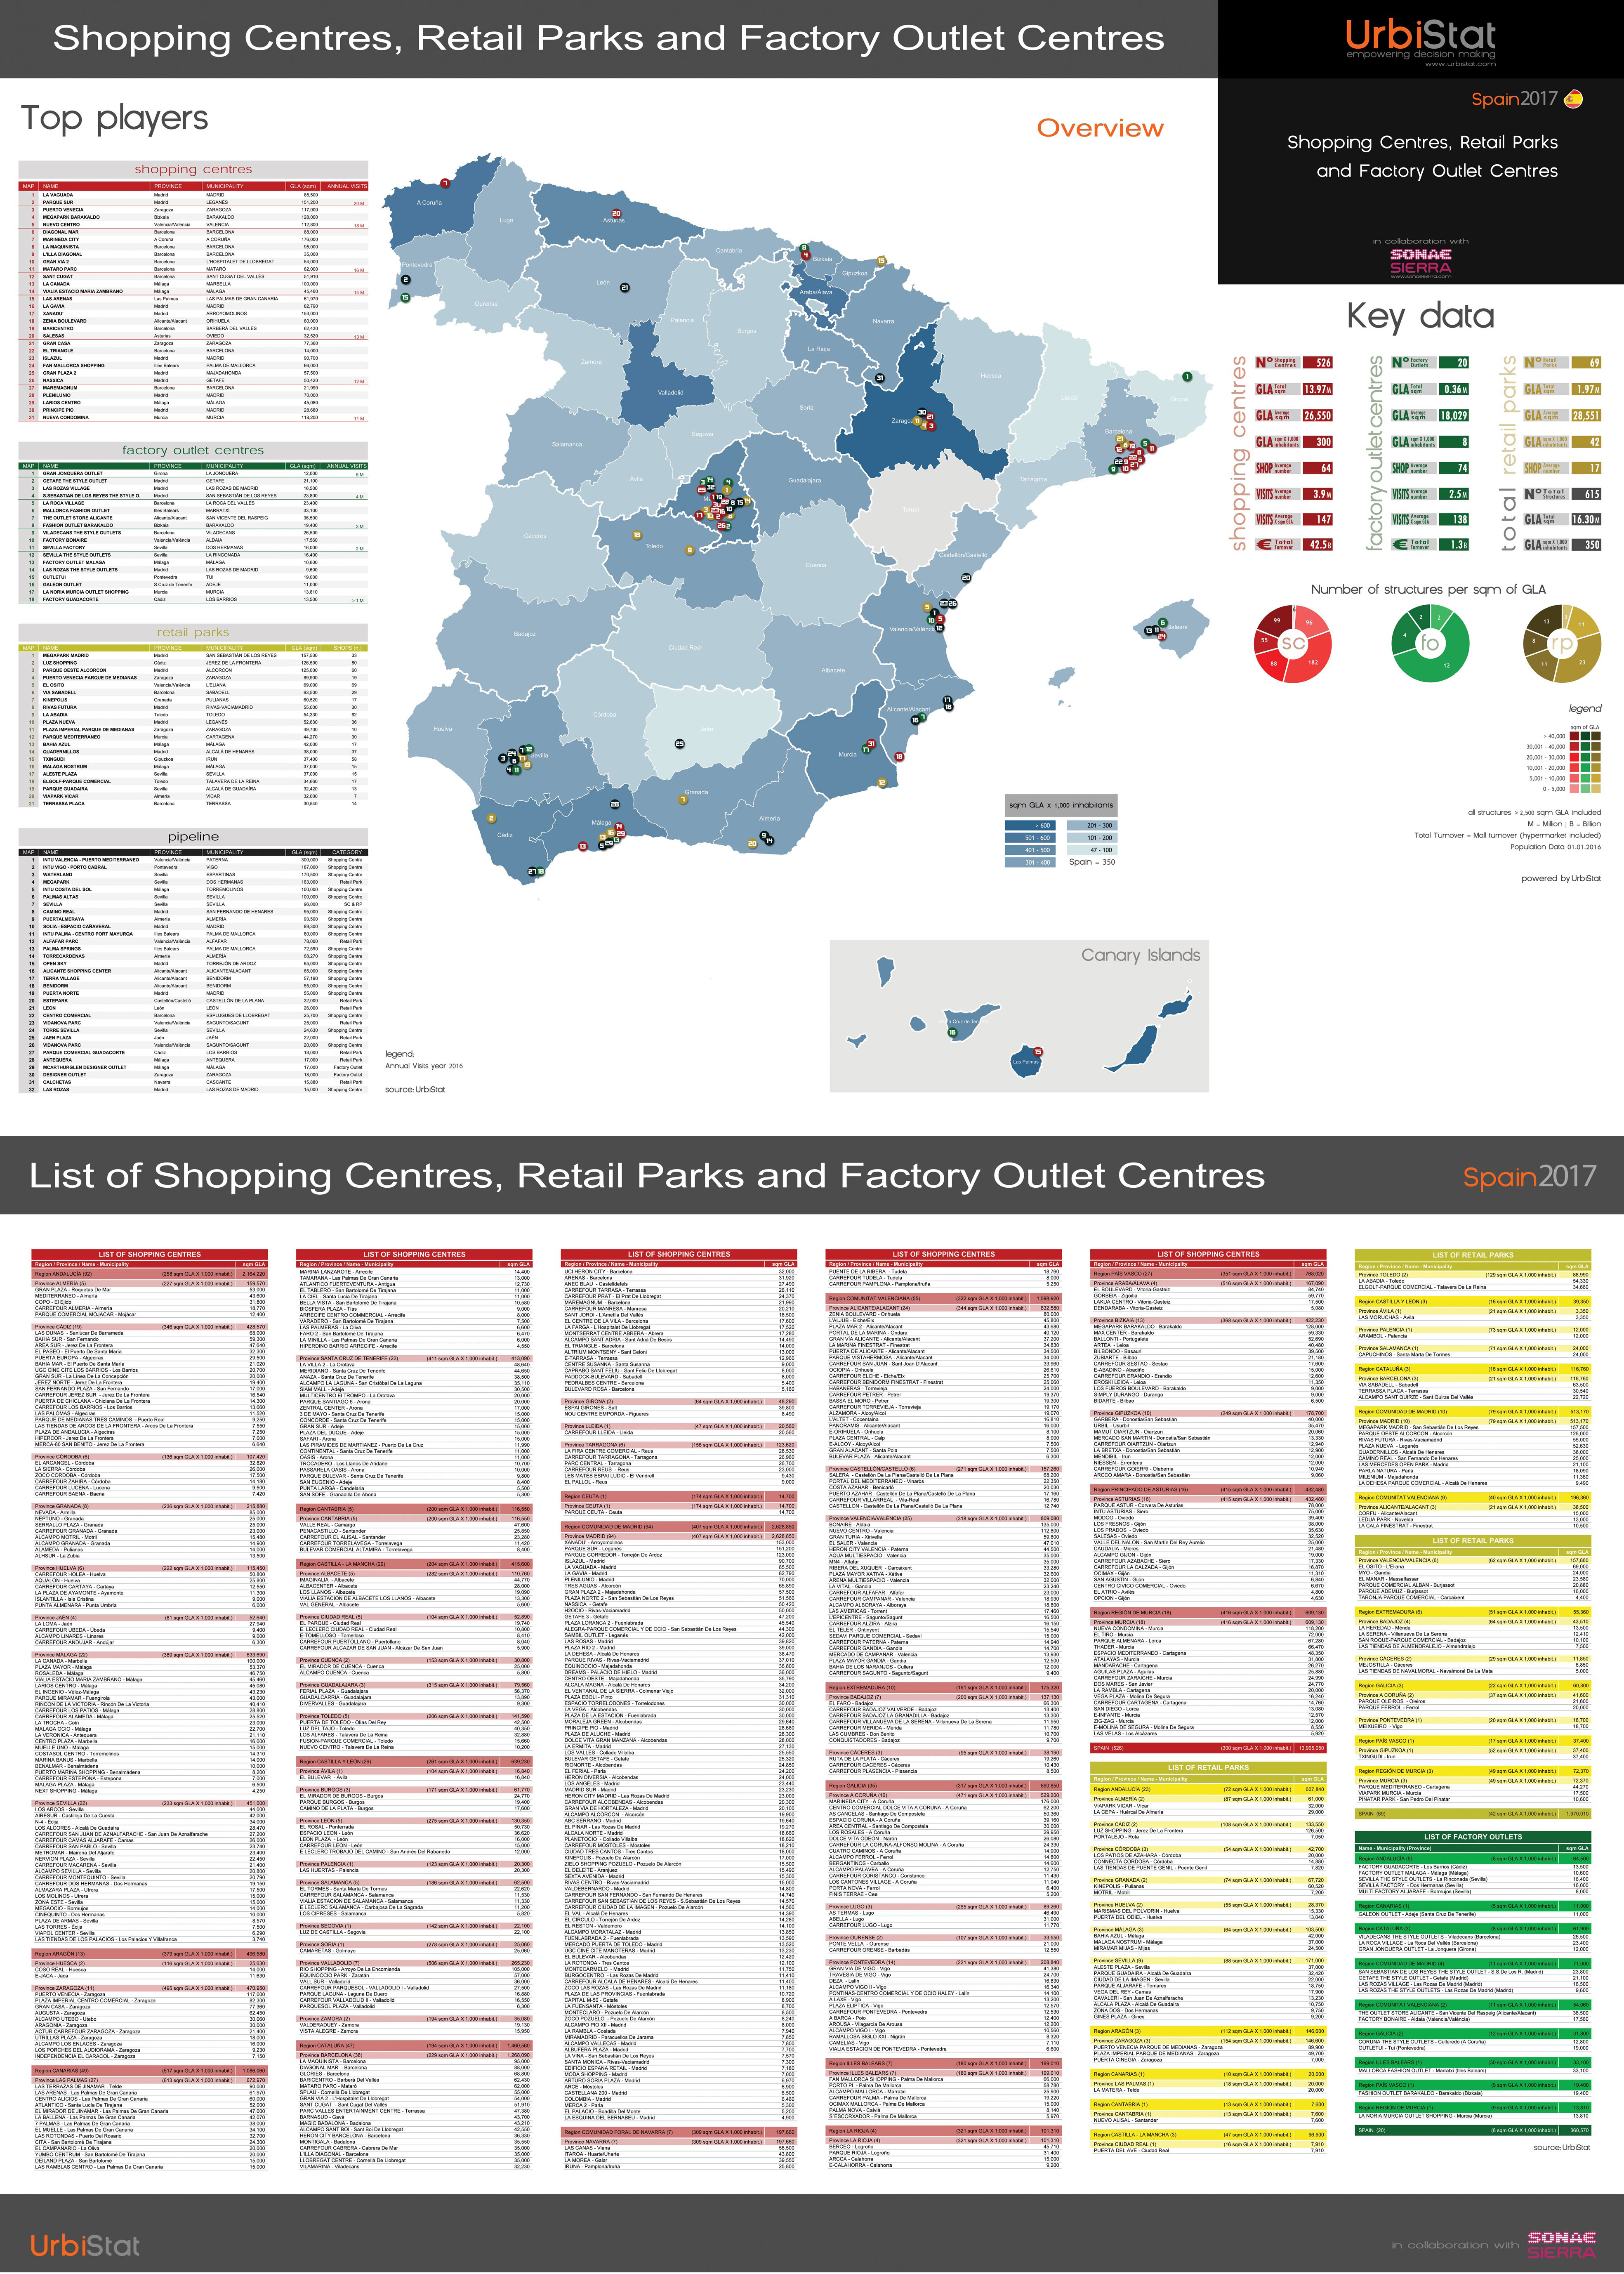 POSTER – SHOPPING CENTRES, RETAIL PARKS AND FACTORY OUTLET CENTRES in Spagna 2017